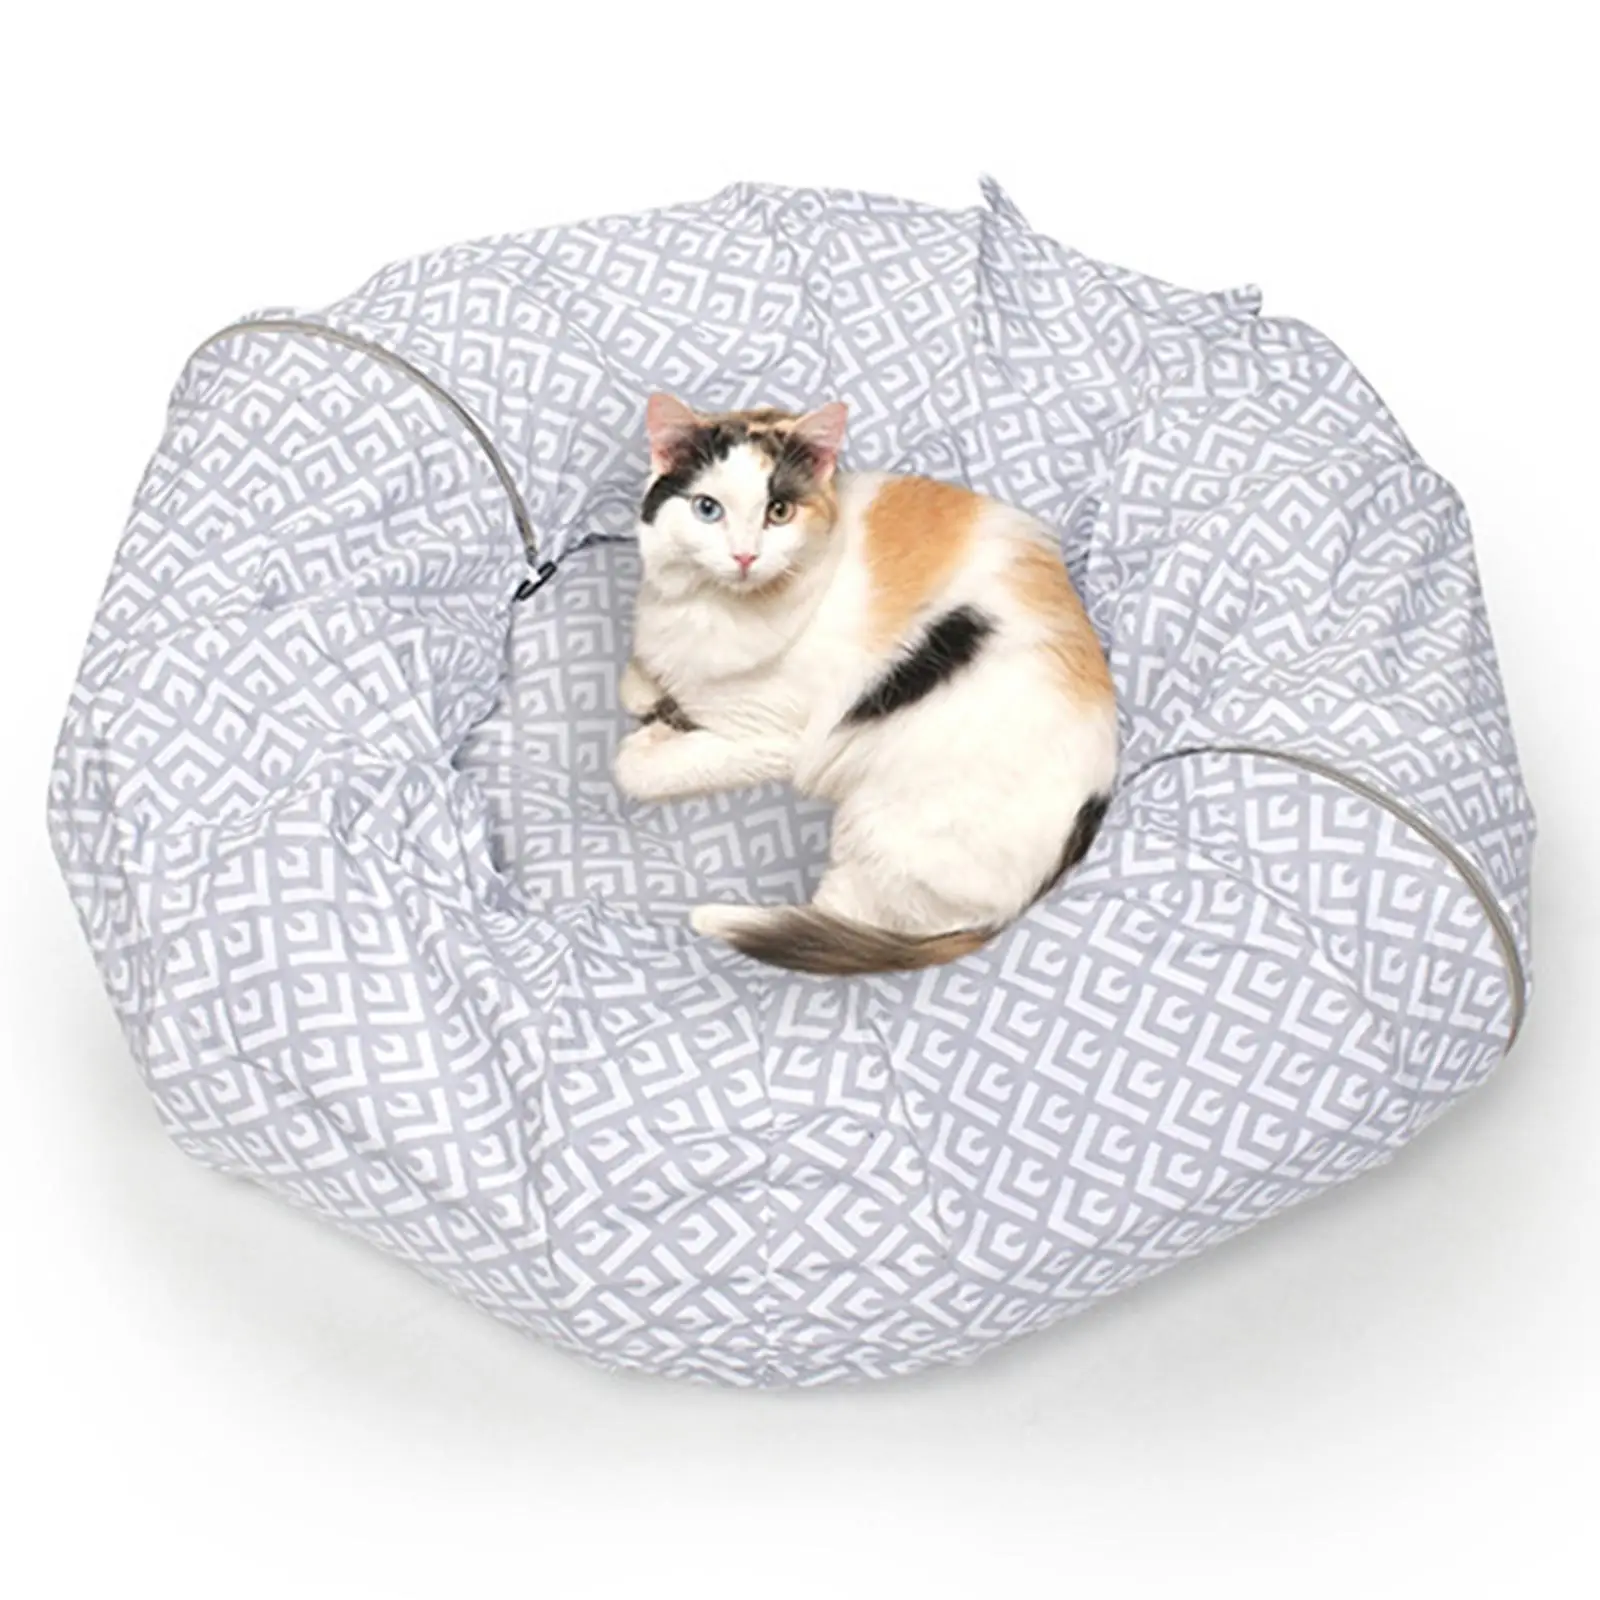 Pet Interactive House Toys Agility Play Training Round Donut Nest Maze Cat Tunnels Bed Cat Tunnel Tube Toy for Kitty Guinea Pig